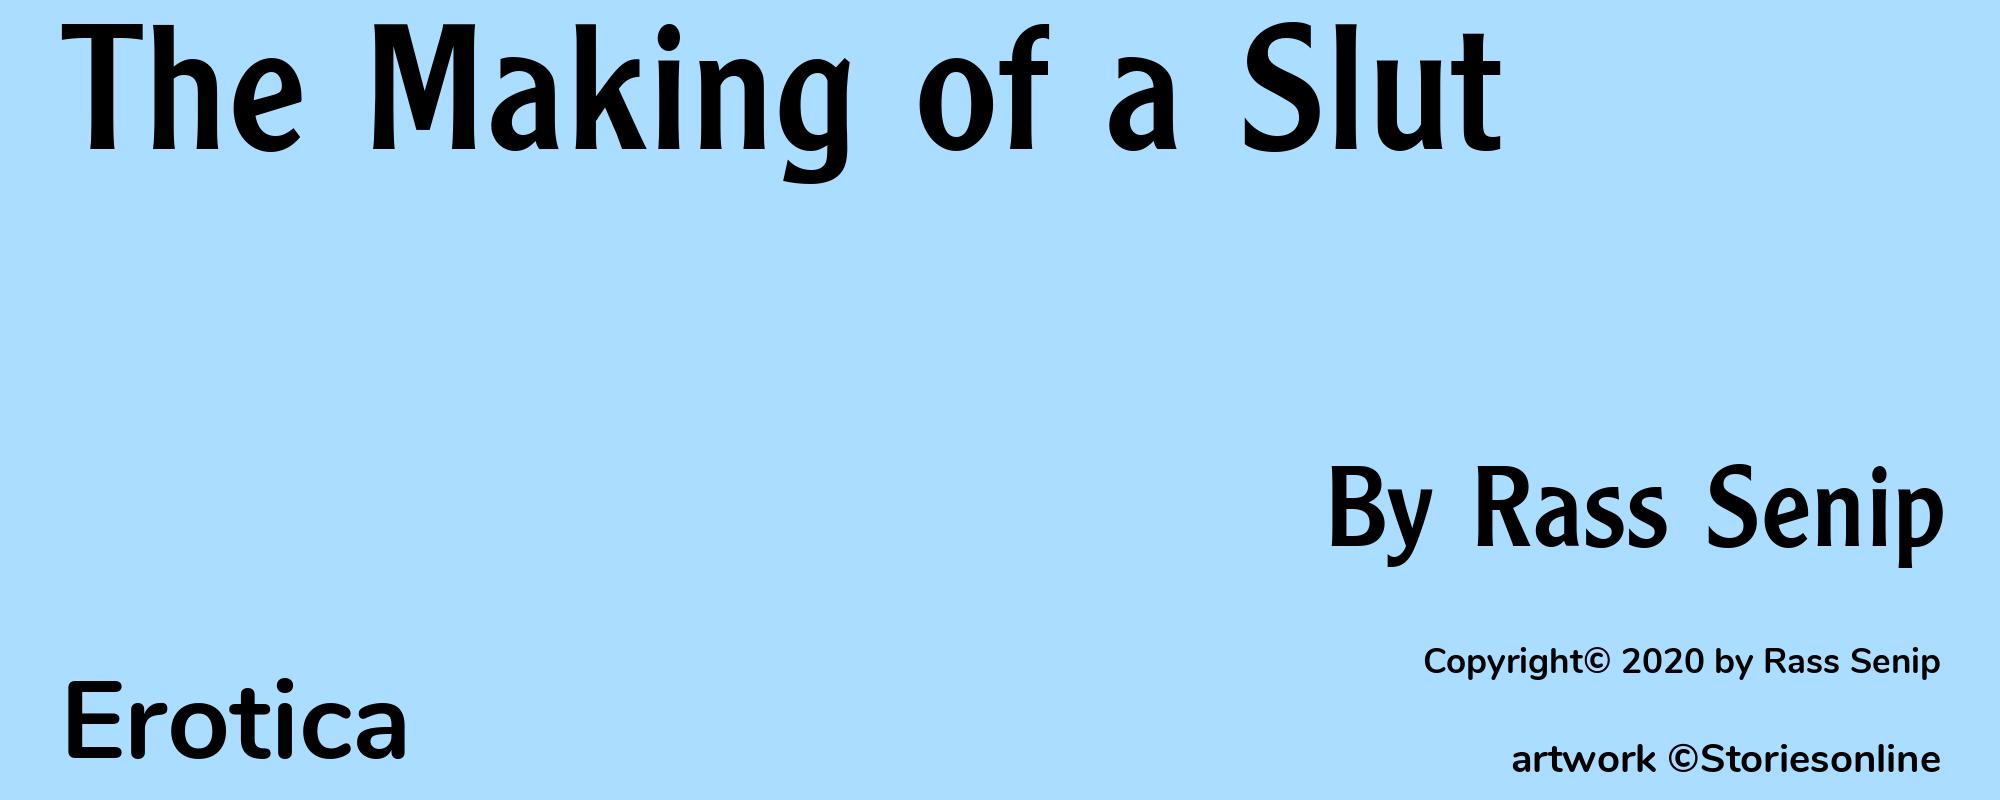 The Making of a Slut - Cover